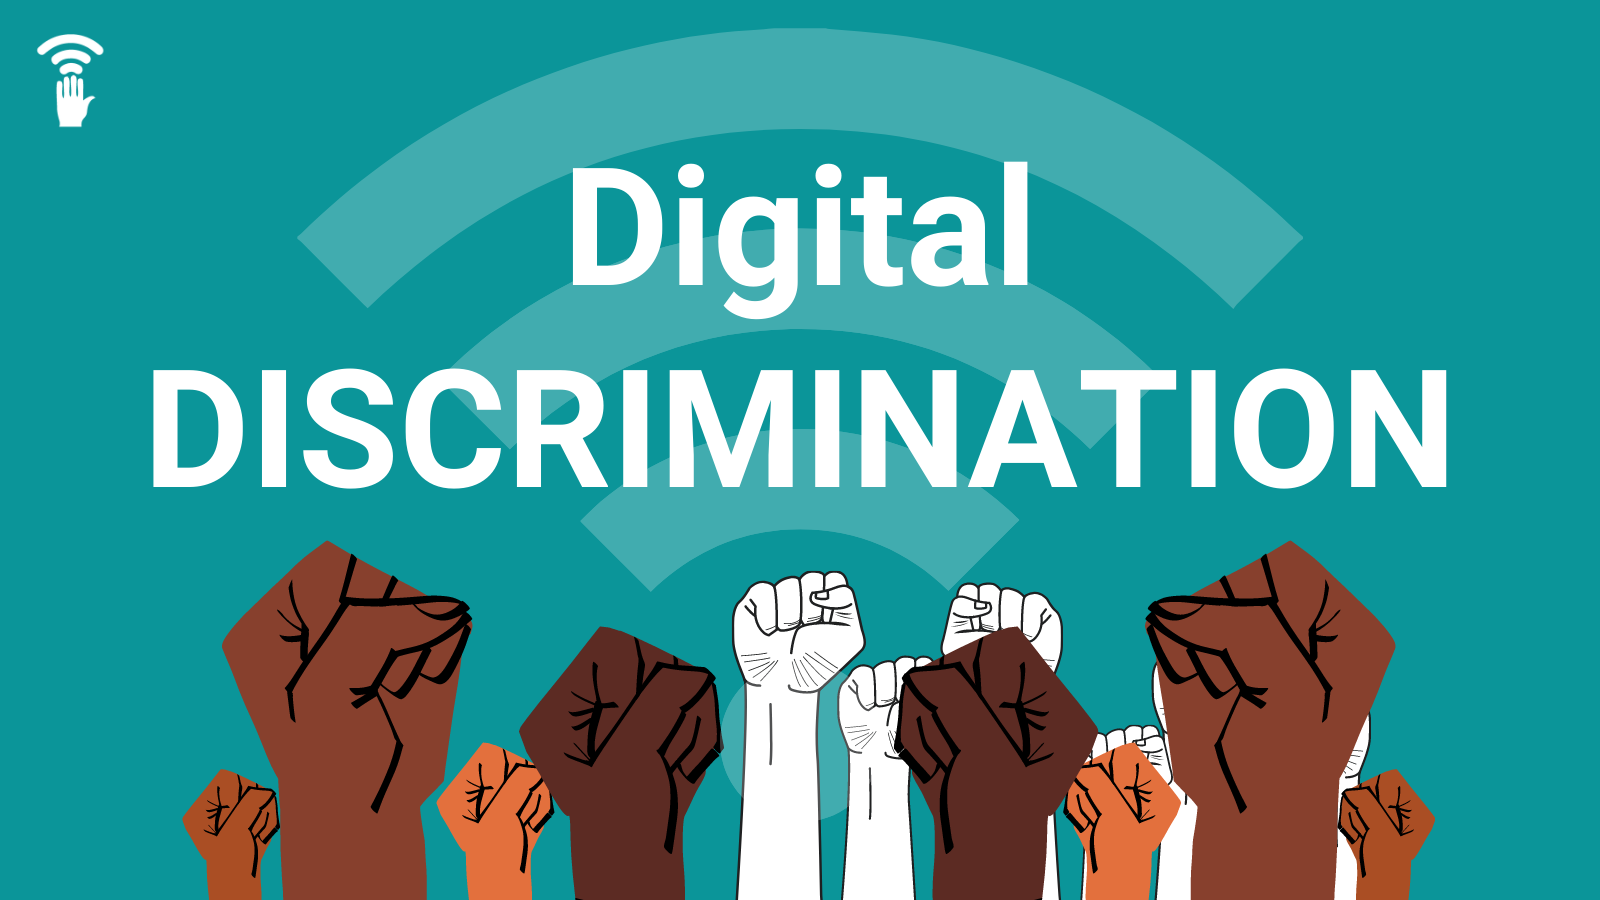 Digital Discrimination with activist fists raised in the air